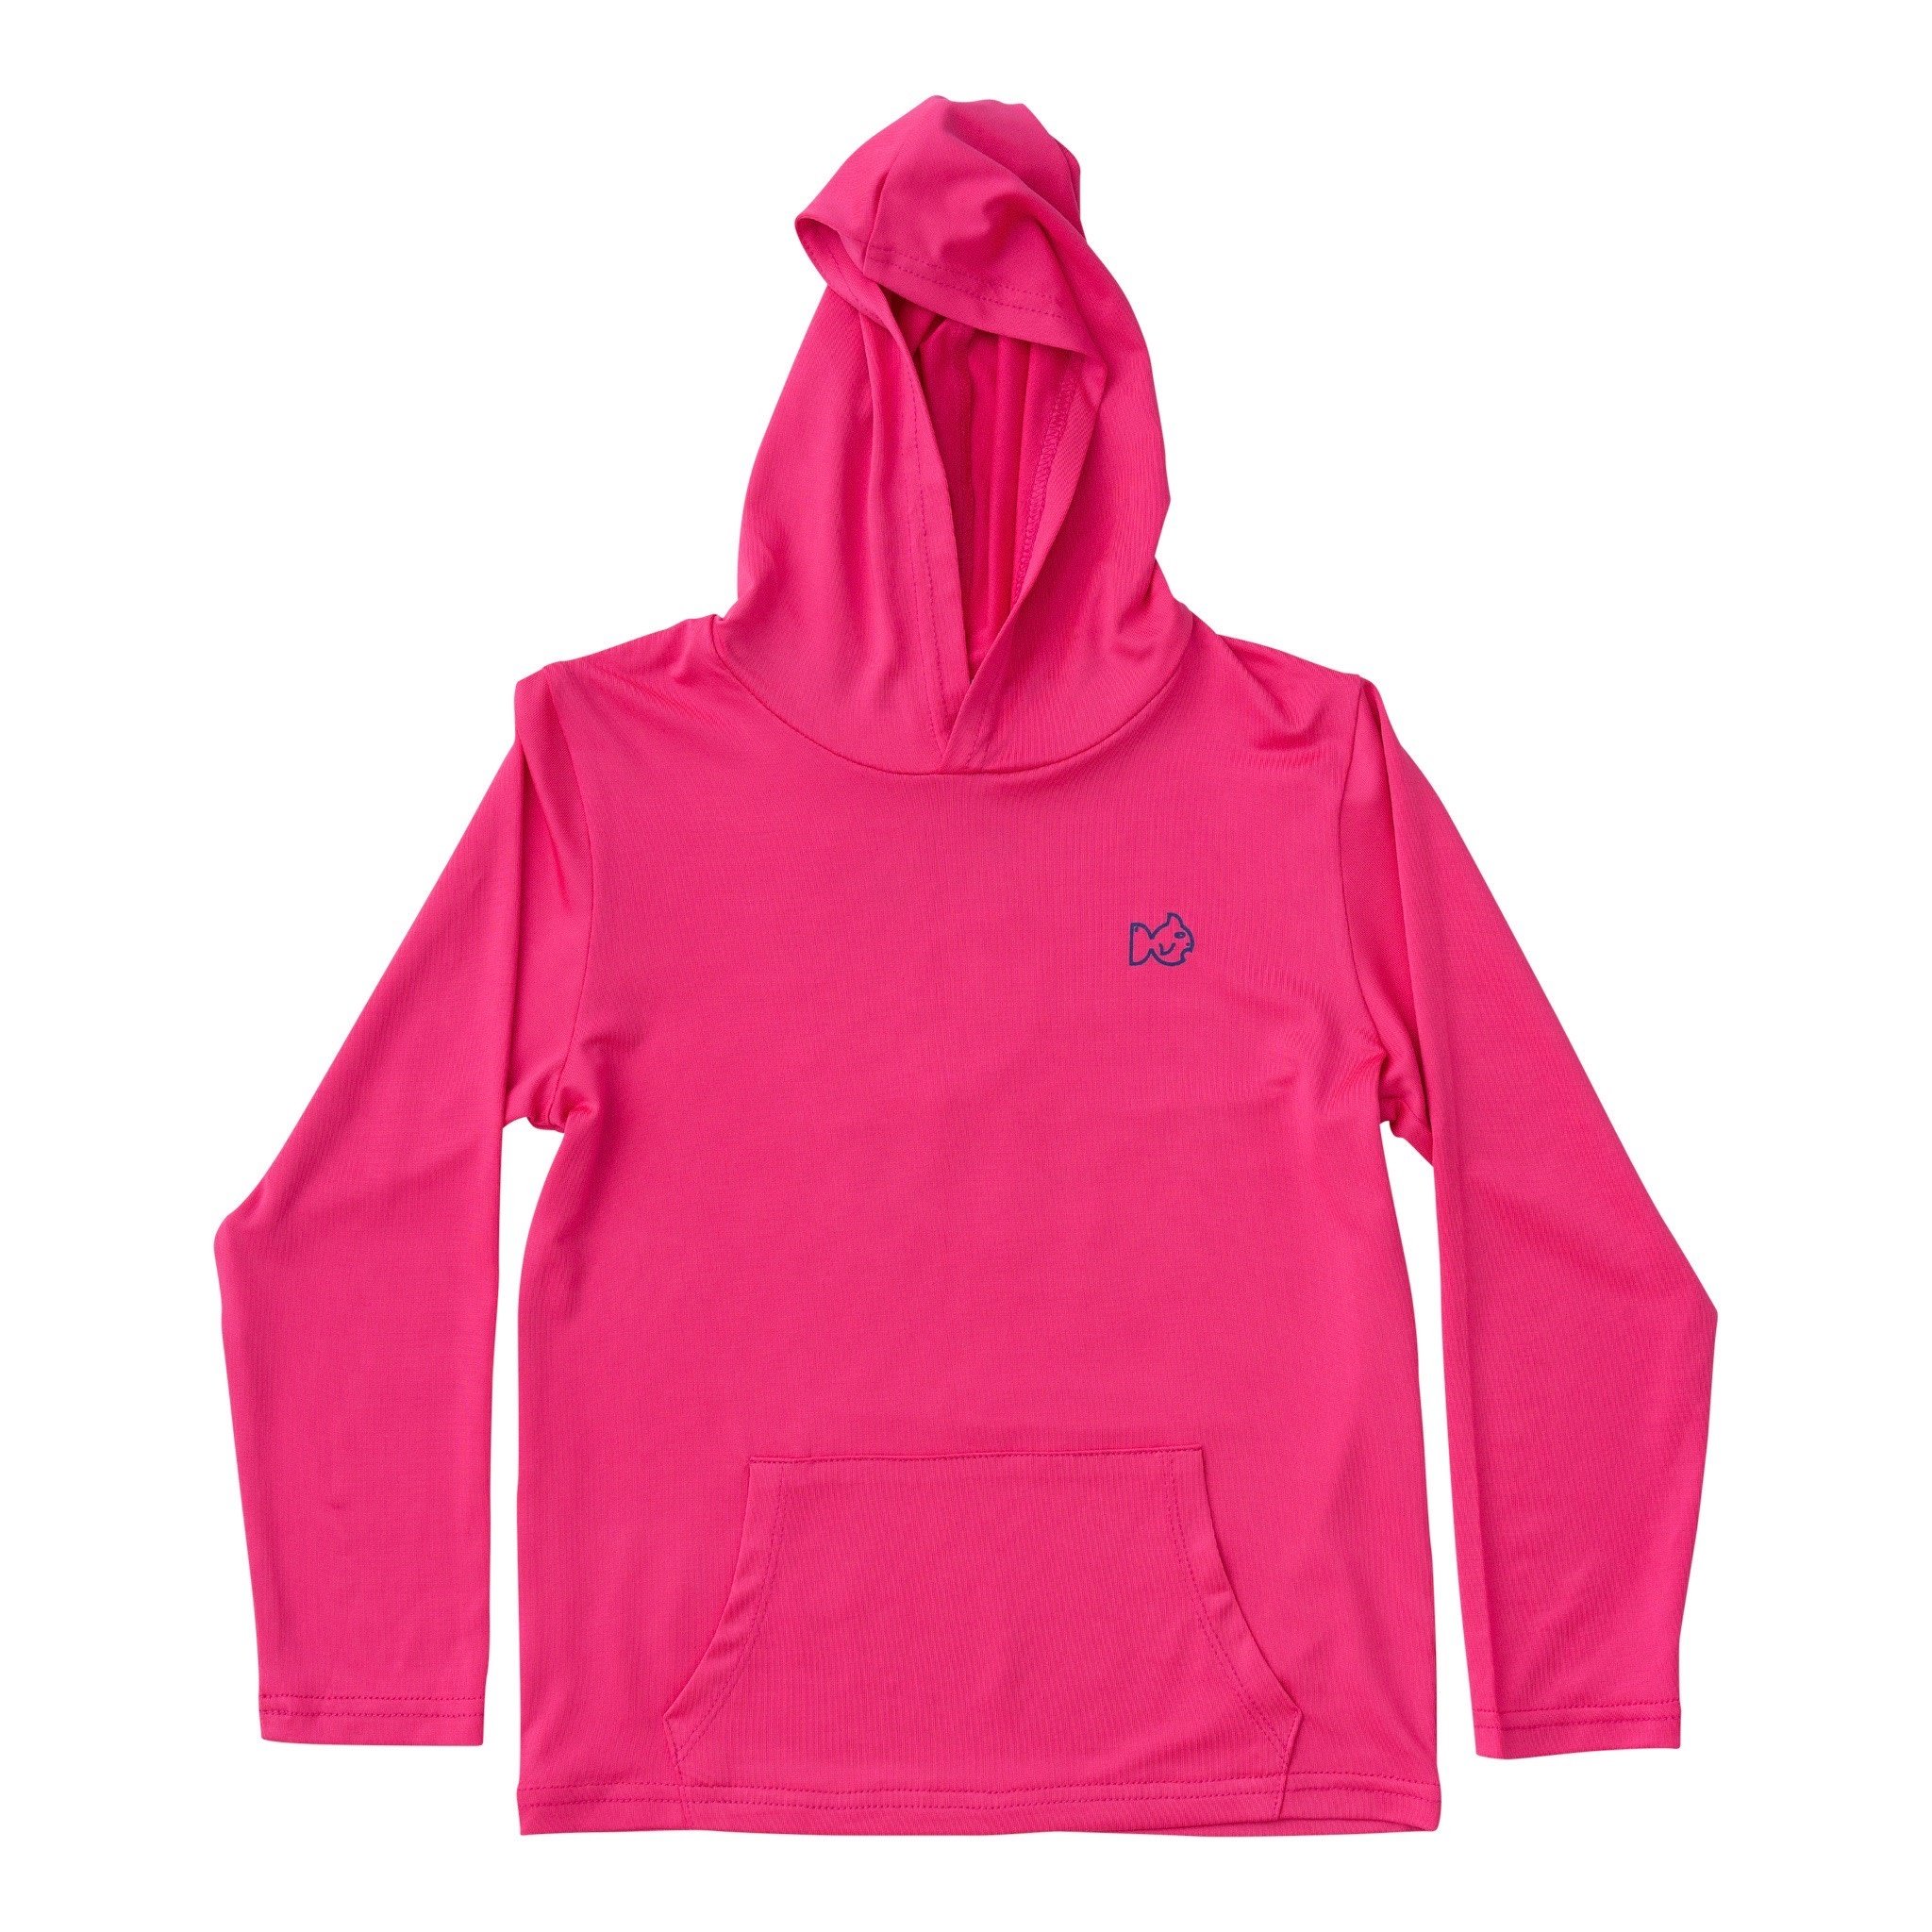 Cheeky Pink Pro Performance Hoodie Fishing Tee - Doodlebugs Children's  Finery & Gifts